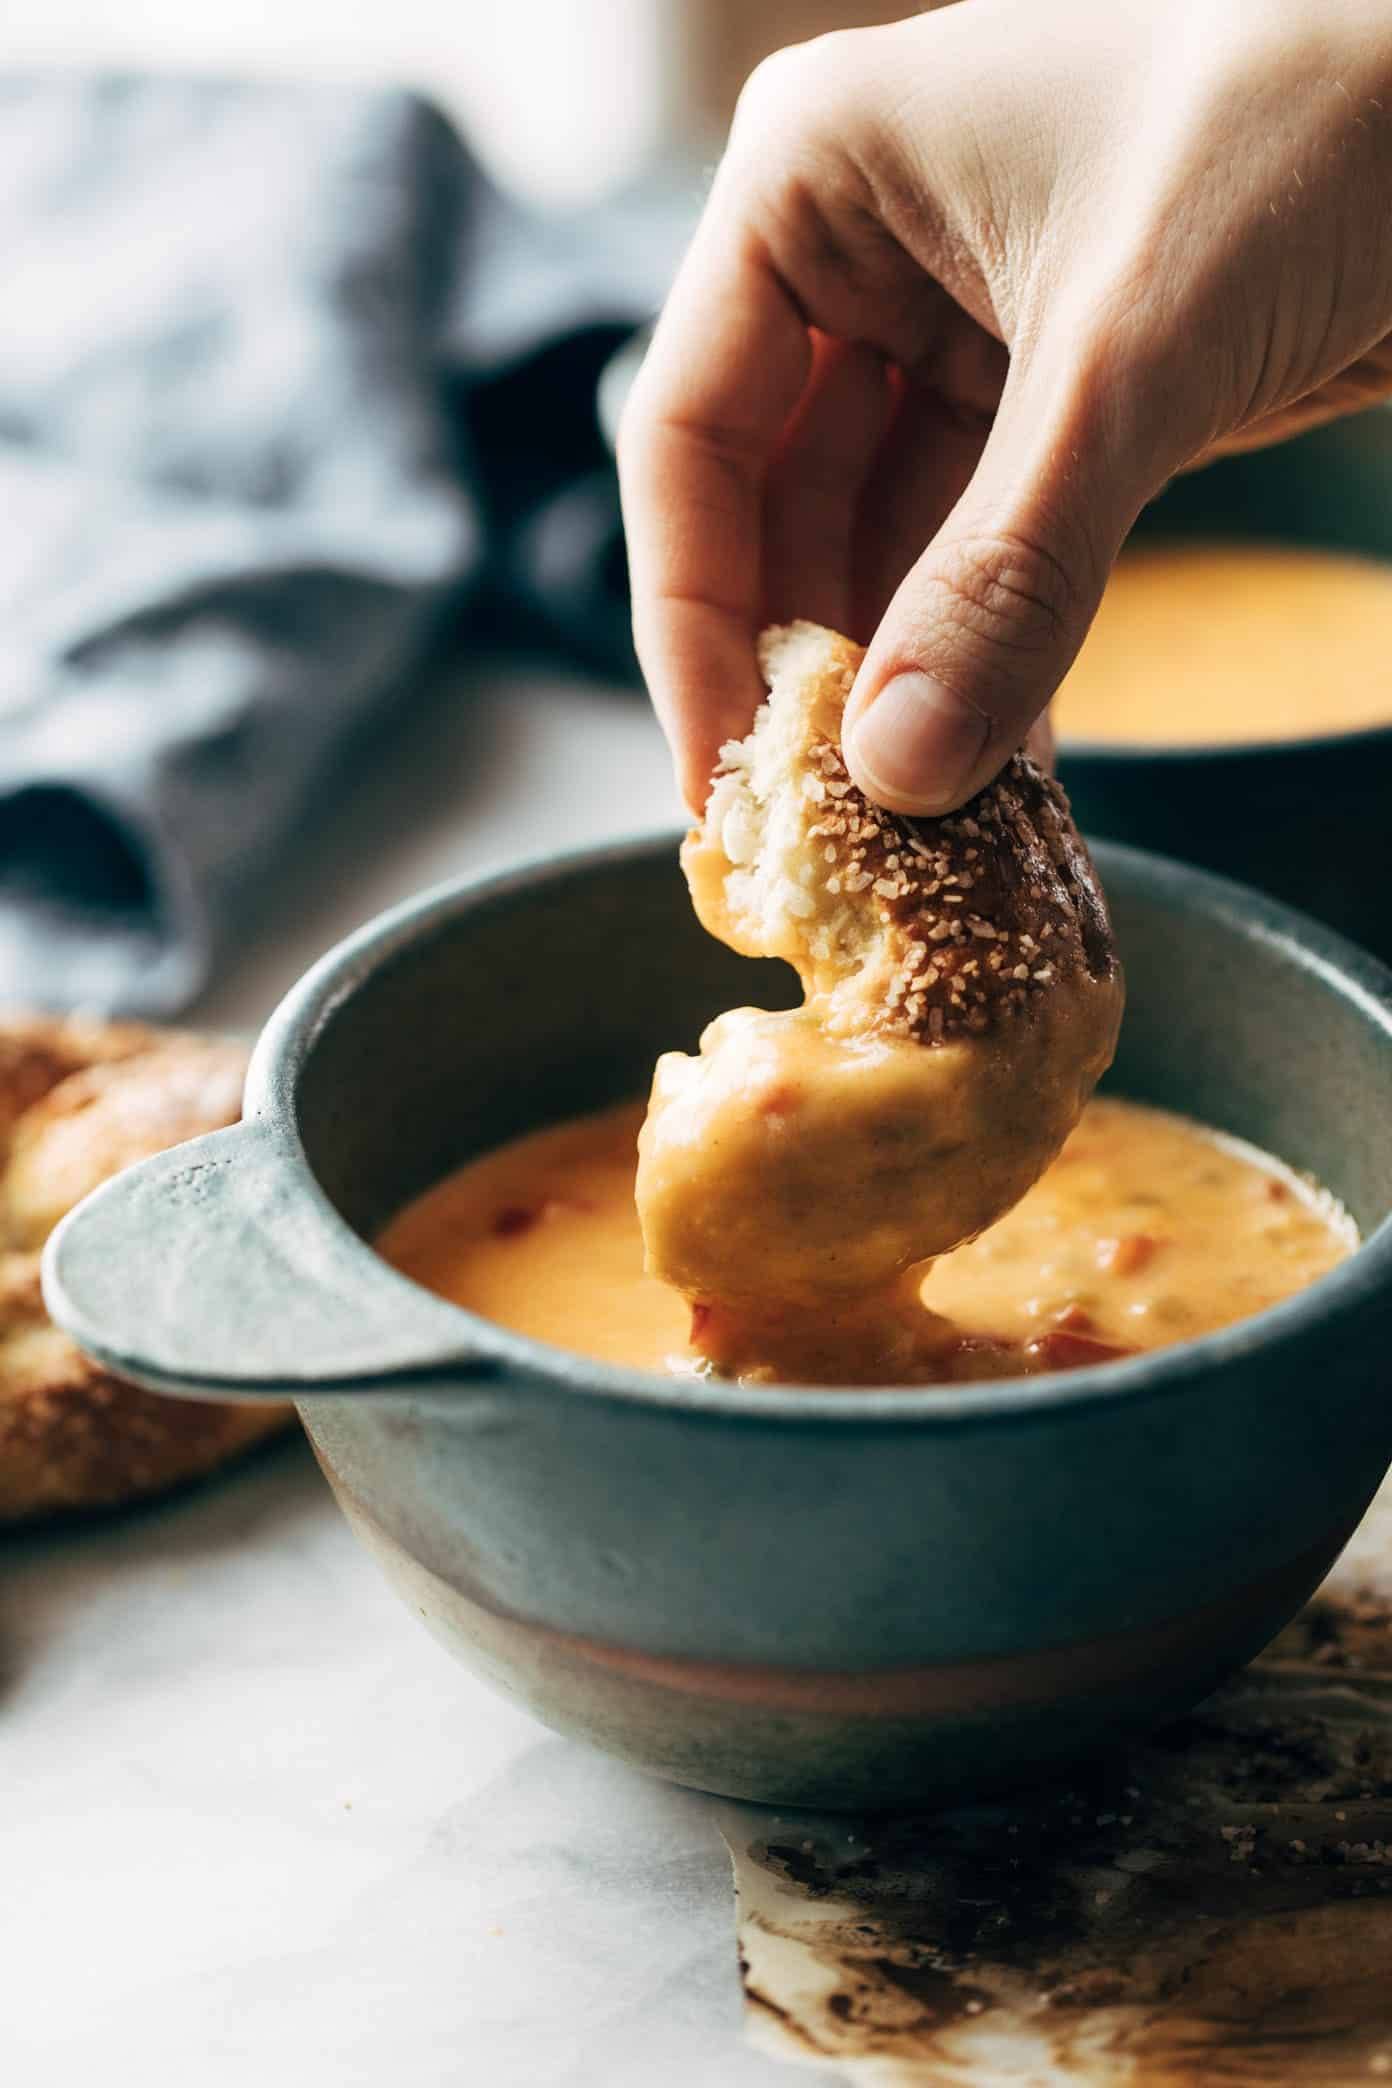 Pretzel bring dunked in Beer Cheese Soup.